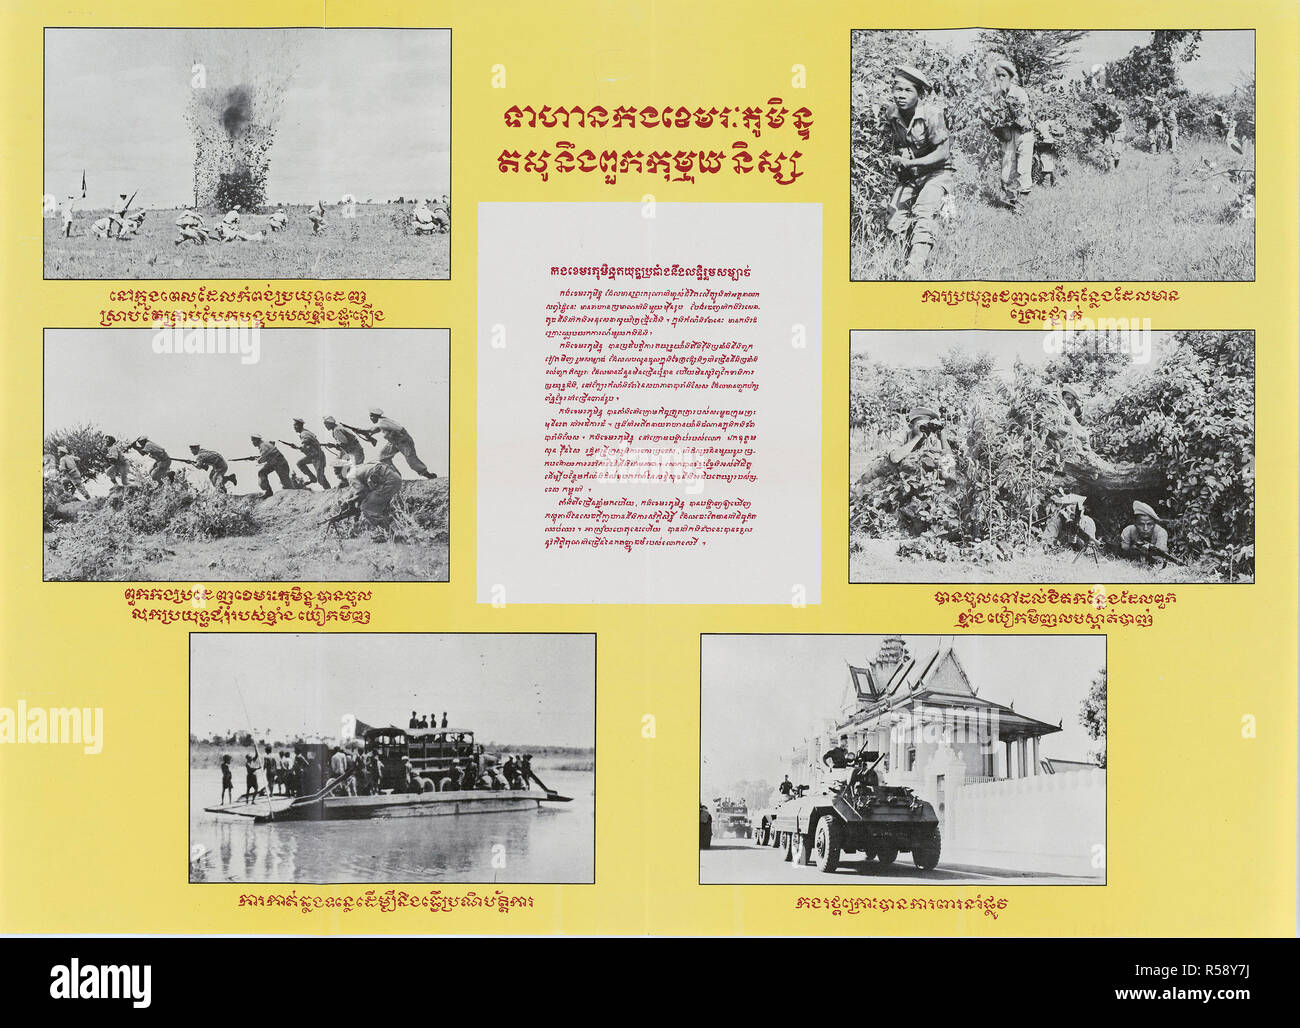 6/12/1952 - U.S. Propaganda Posters in 1950s Asia - Cambodian Army Vs. Communists Poster (written in Khmer) Stock Photo